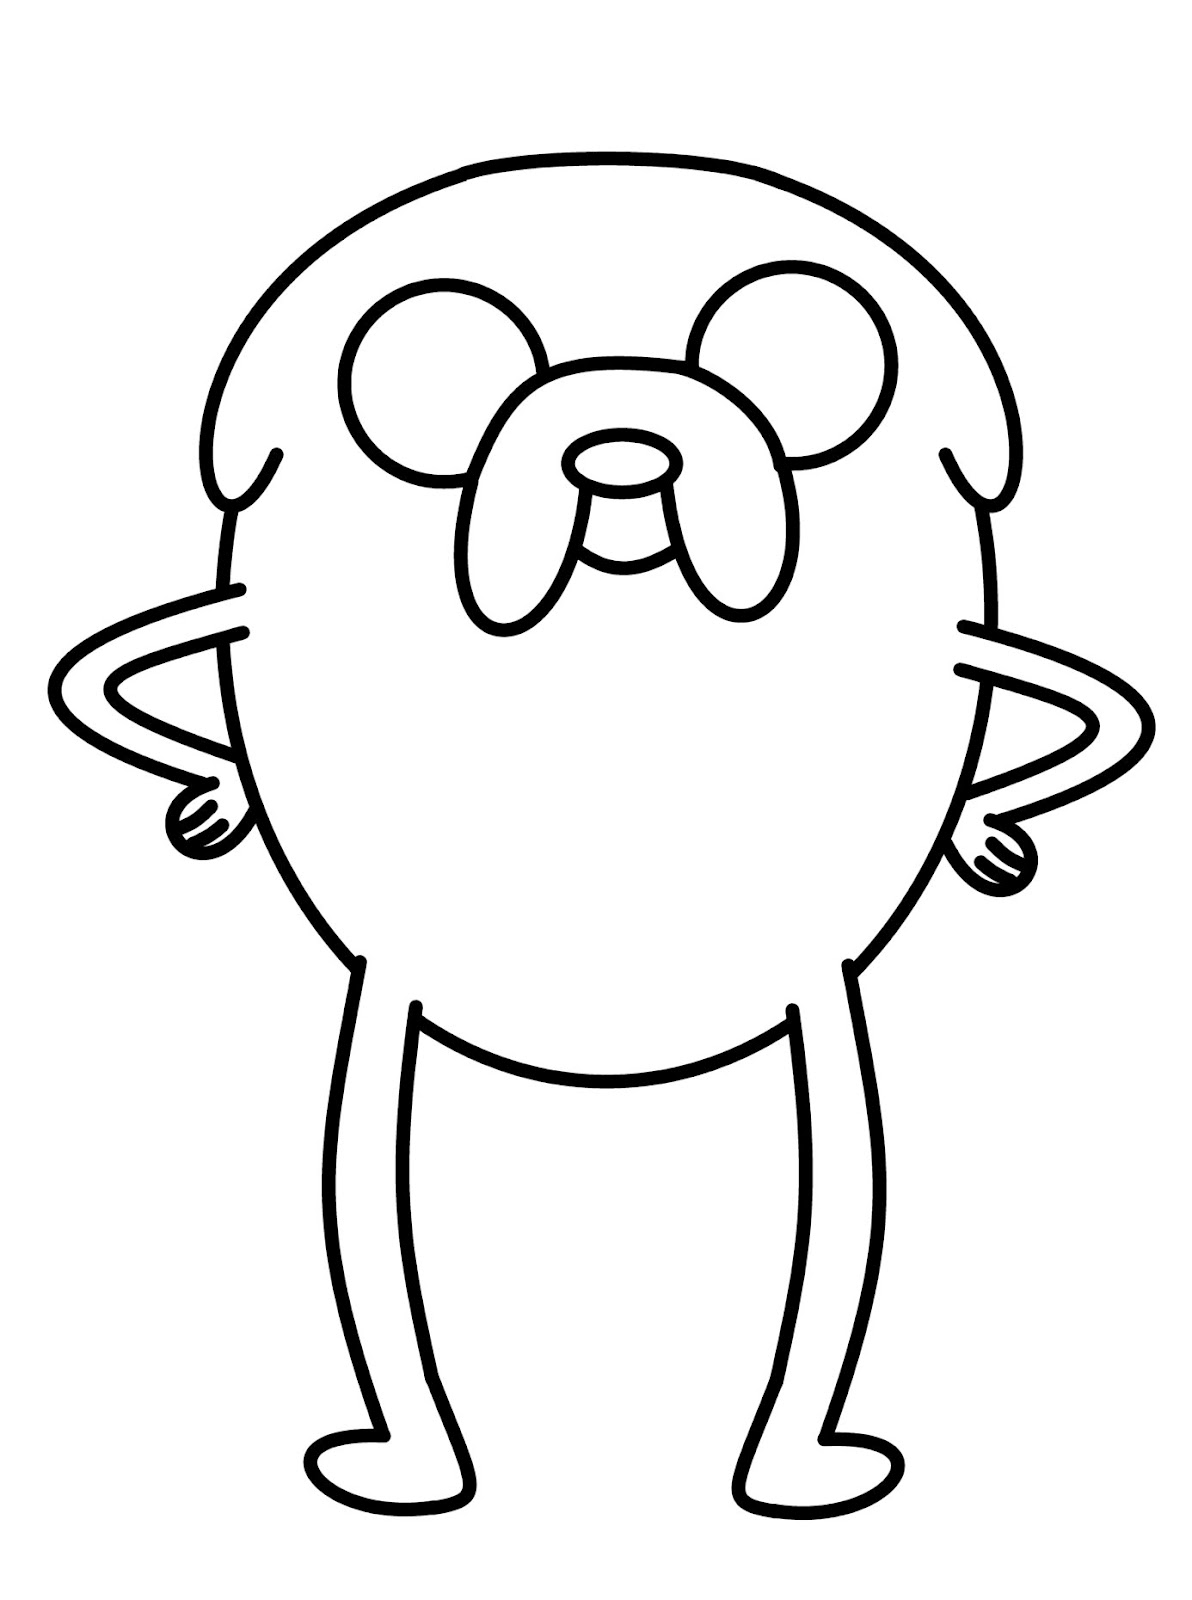 How To Draw Jake The Dog - ClipArt Best